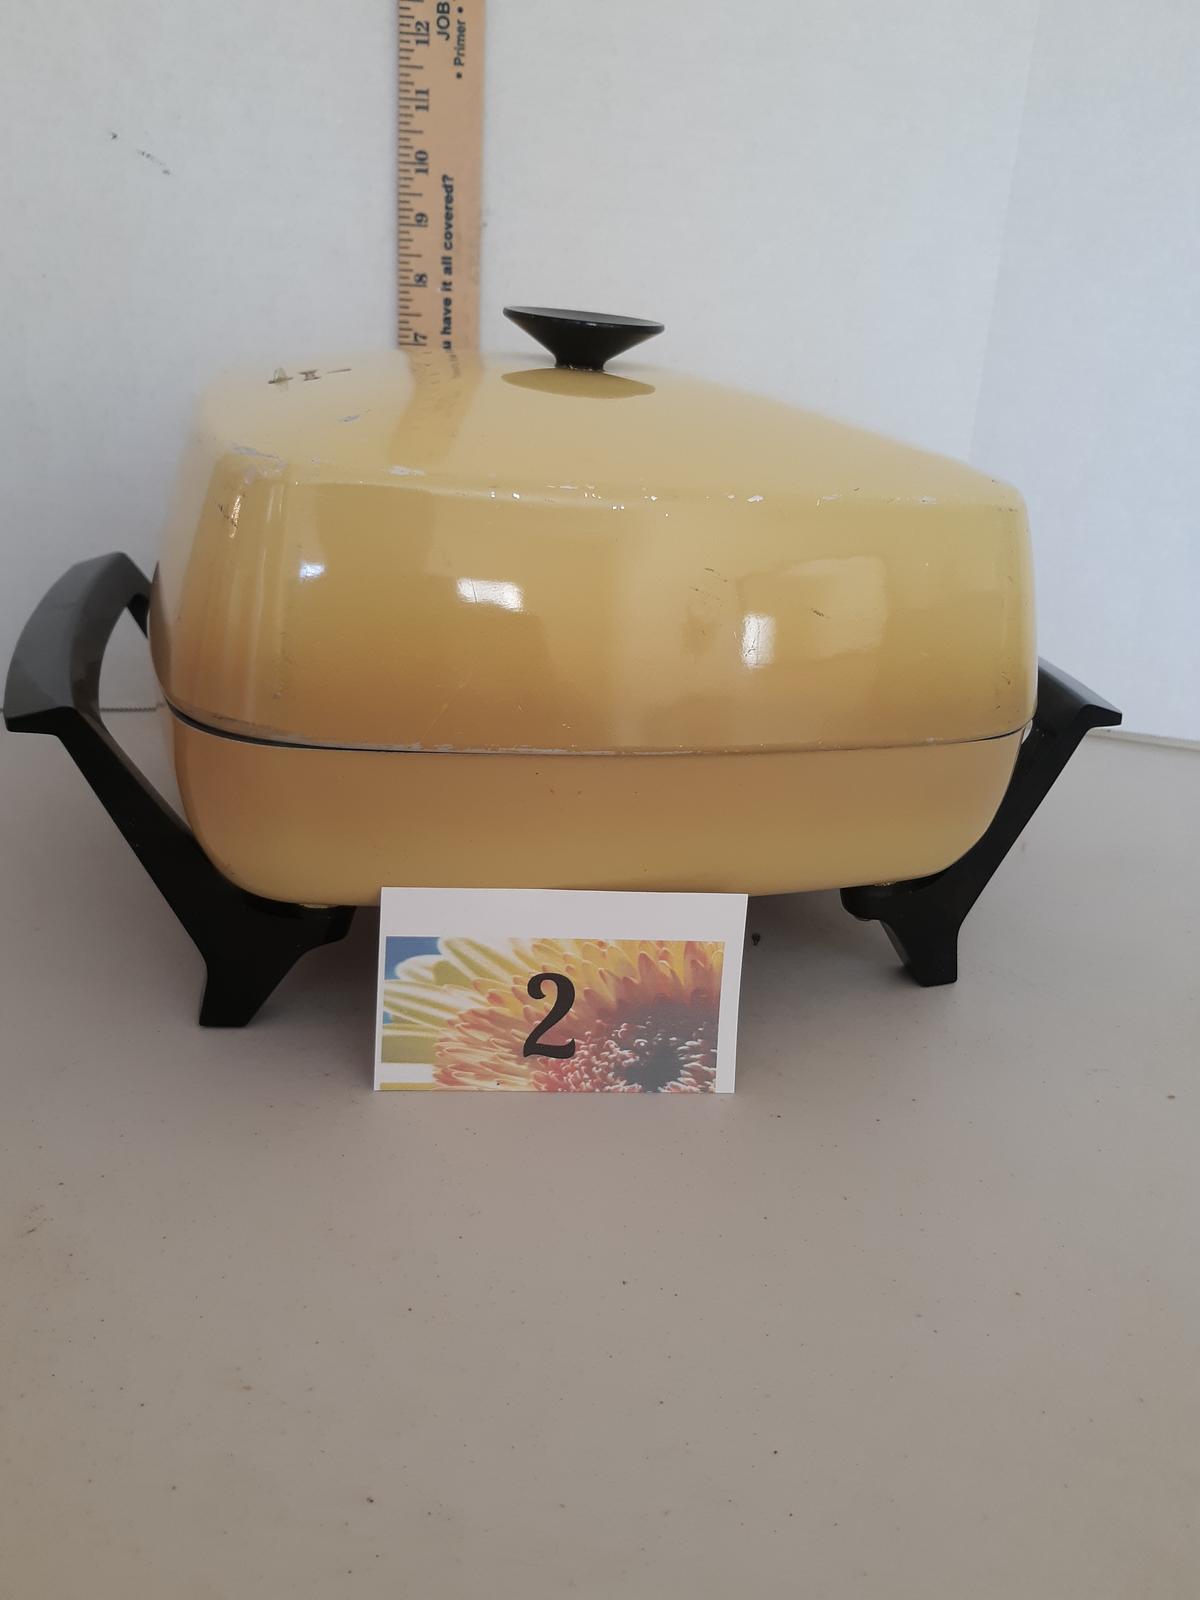 Electric Cooker, West Bend, Yellow